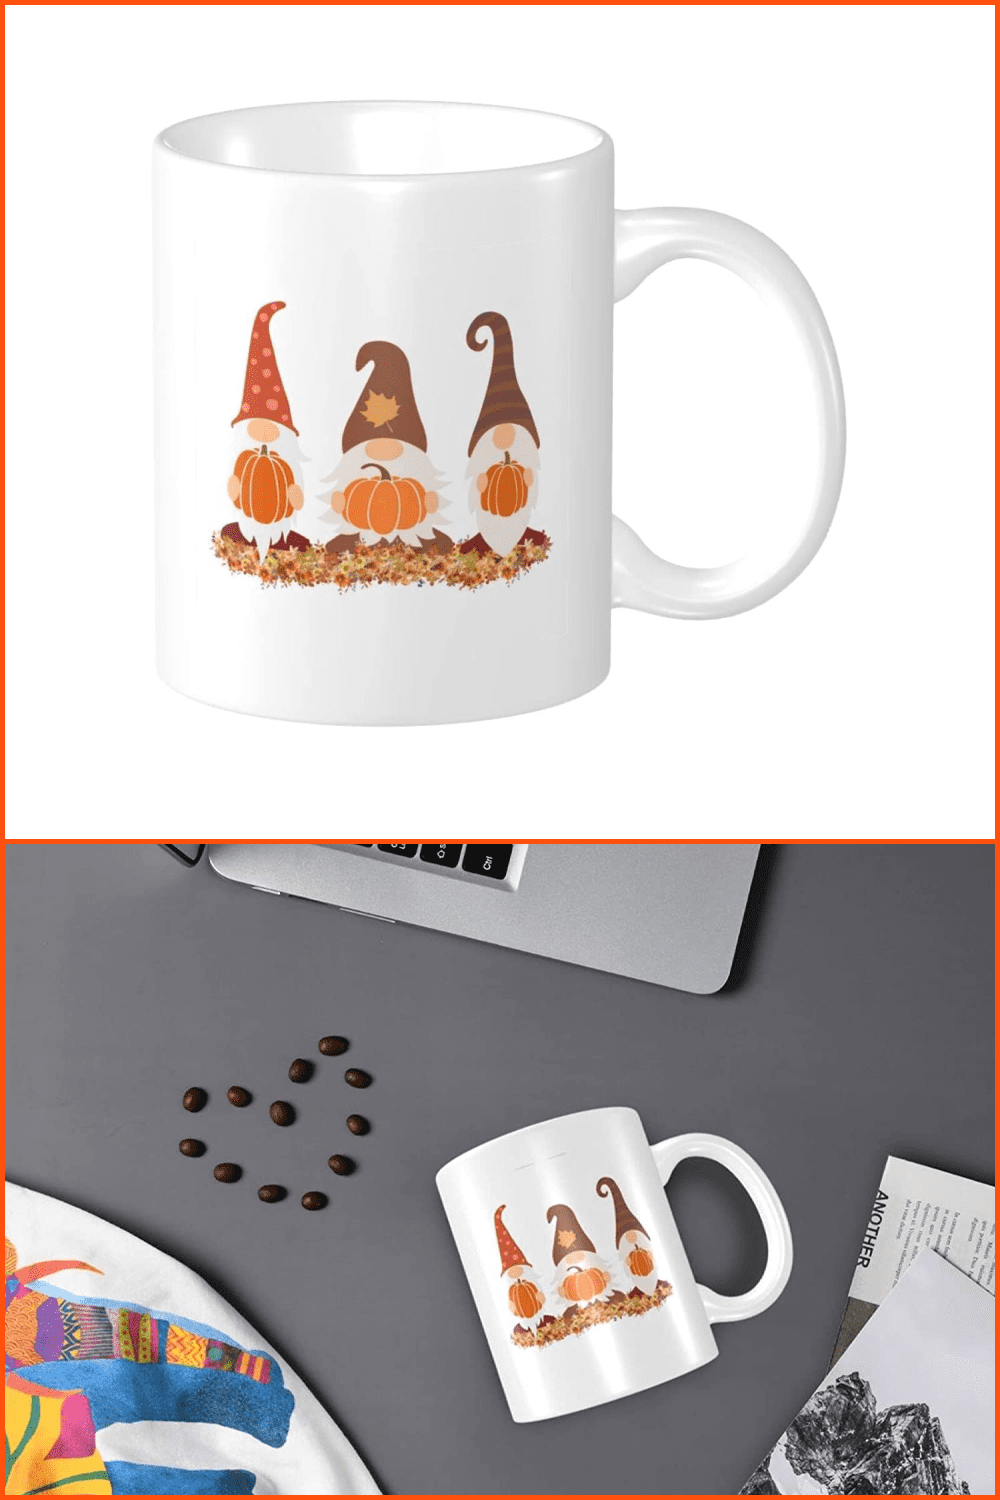 Collage with a white mug depicting three gnomes with pumpkins in their hands.